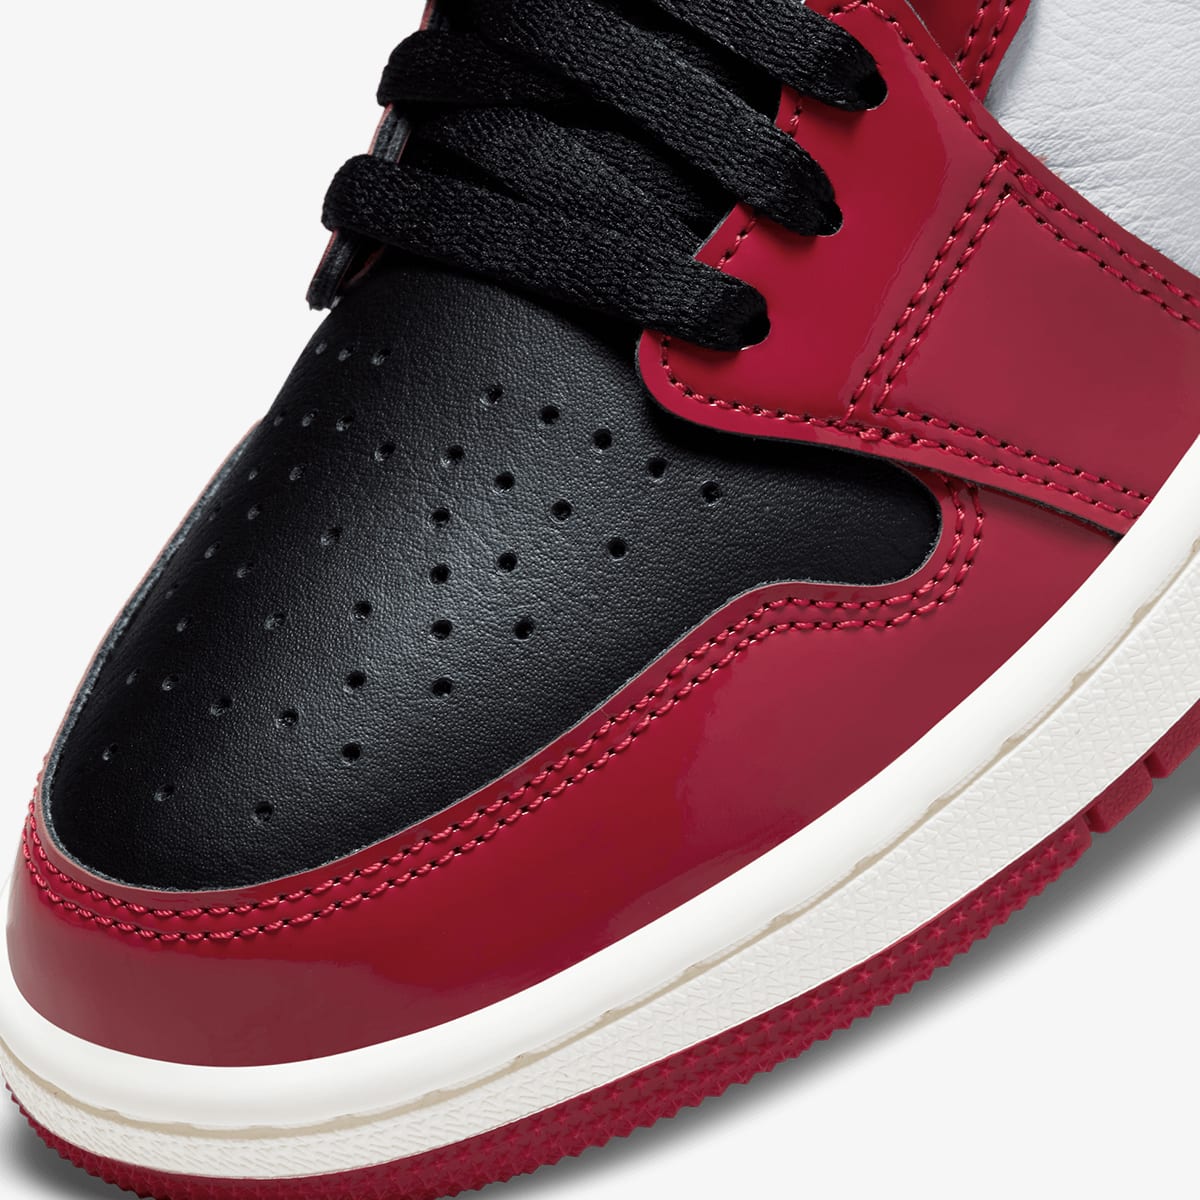 Air Jordan 1 Zoom Comfort W (Black & Red) | END. Launches